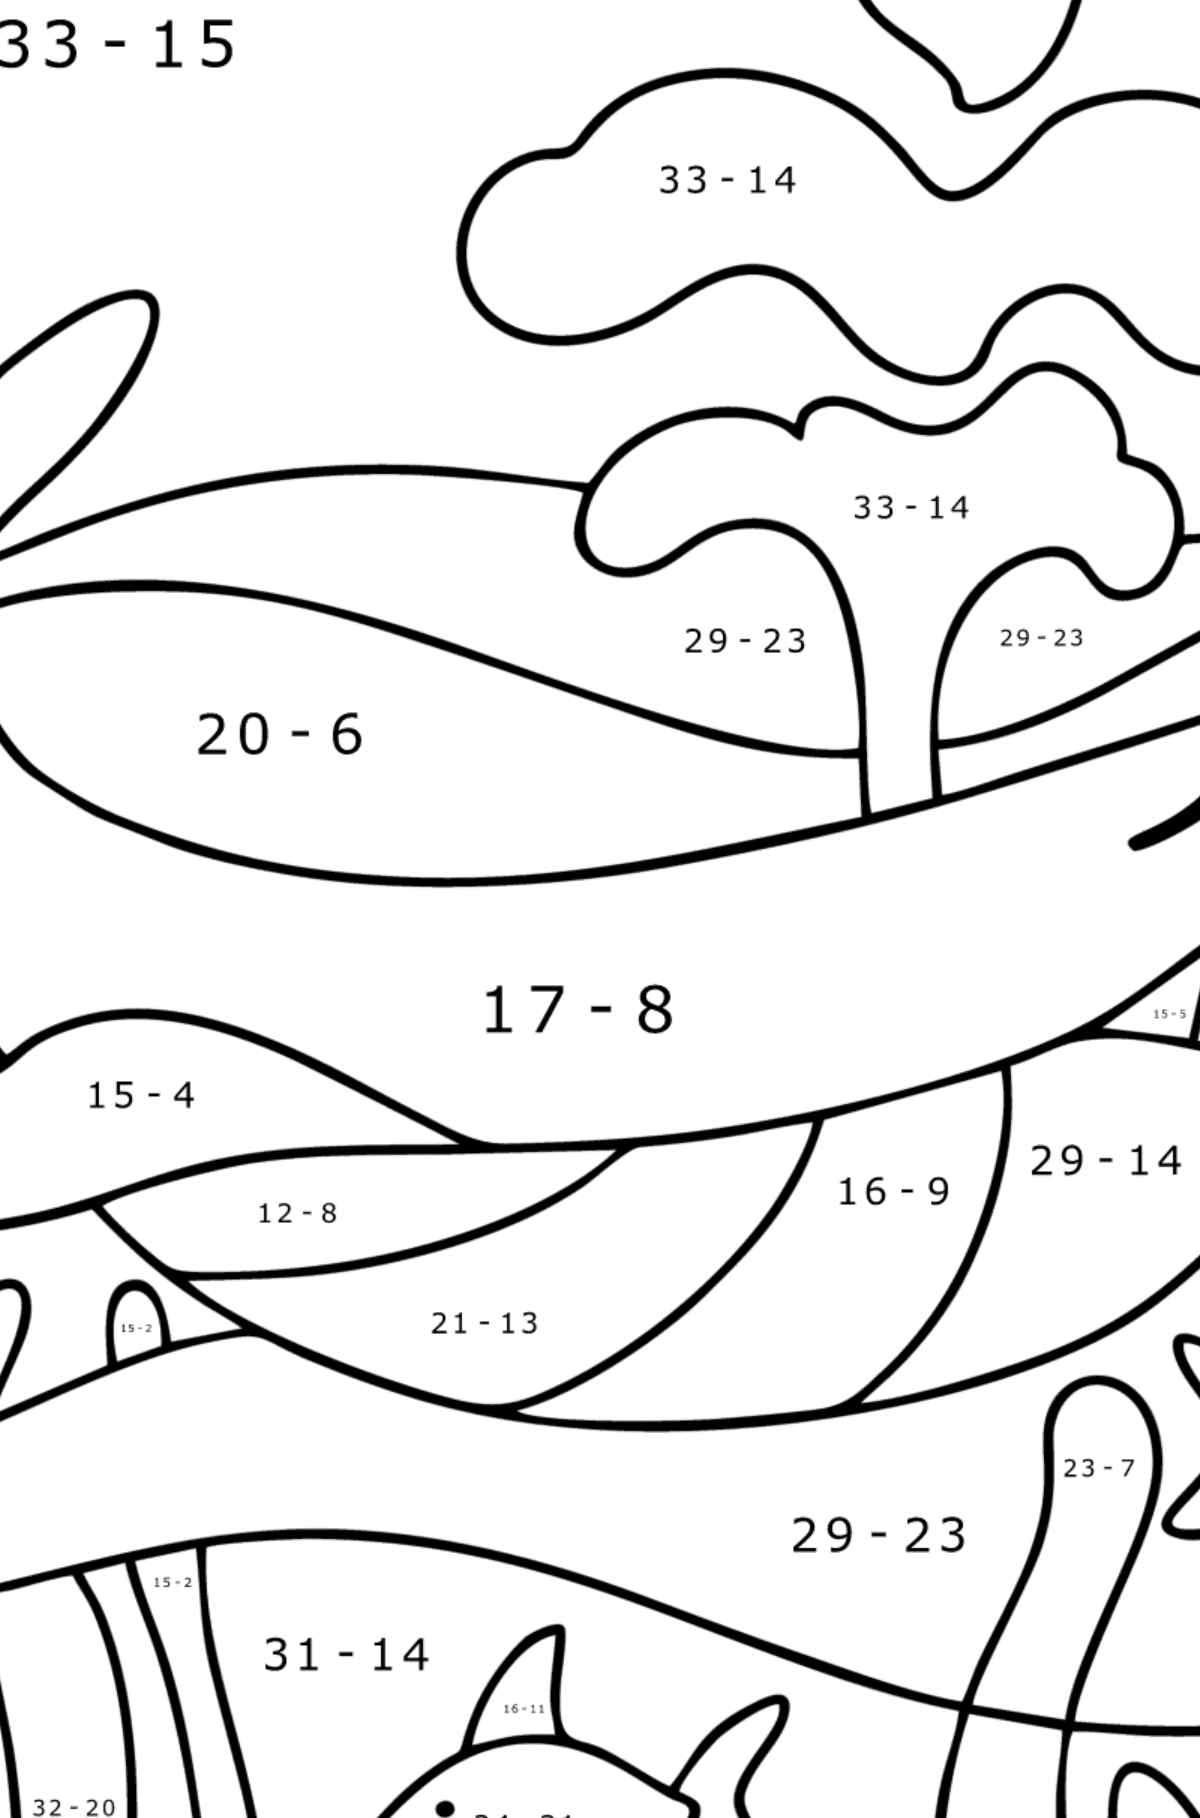 Cute sperm whale coloring page - Math Coloring - Subtraction for Kids